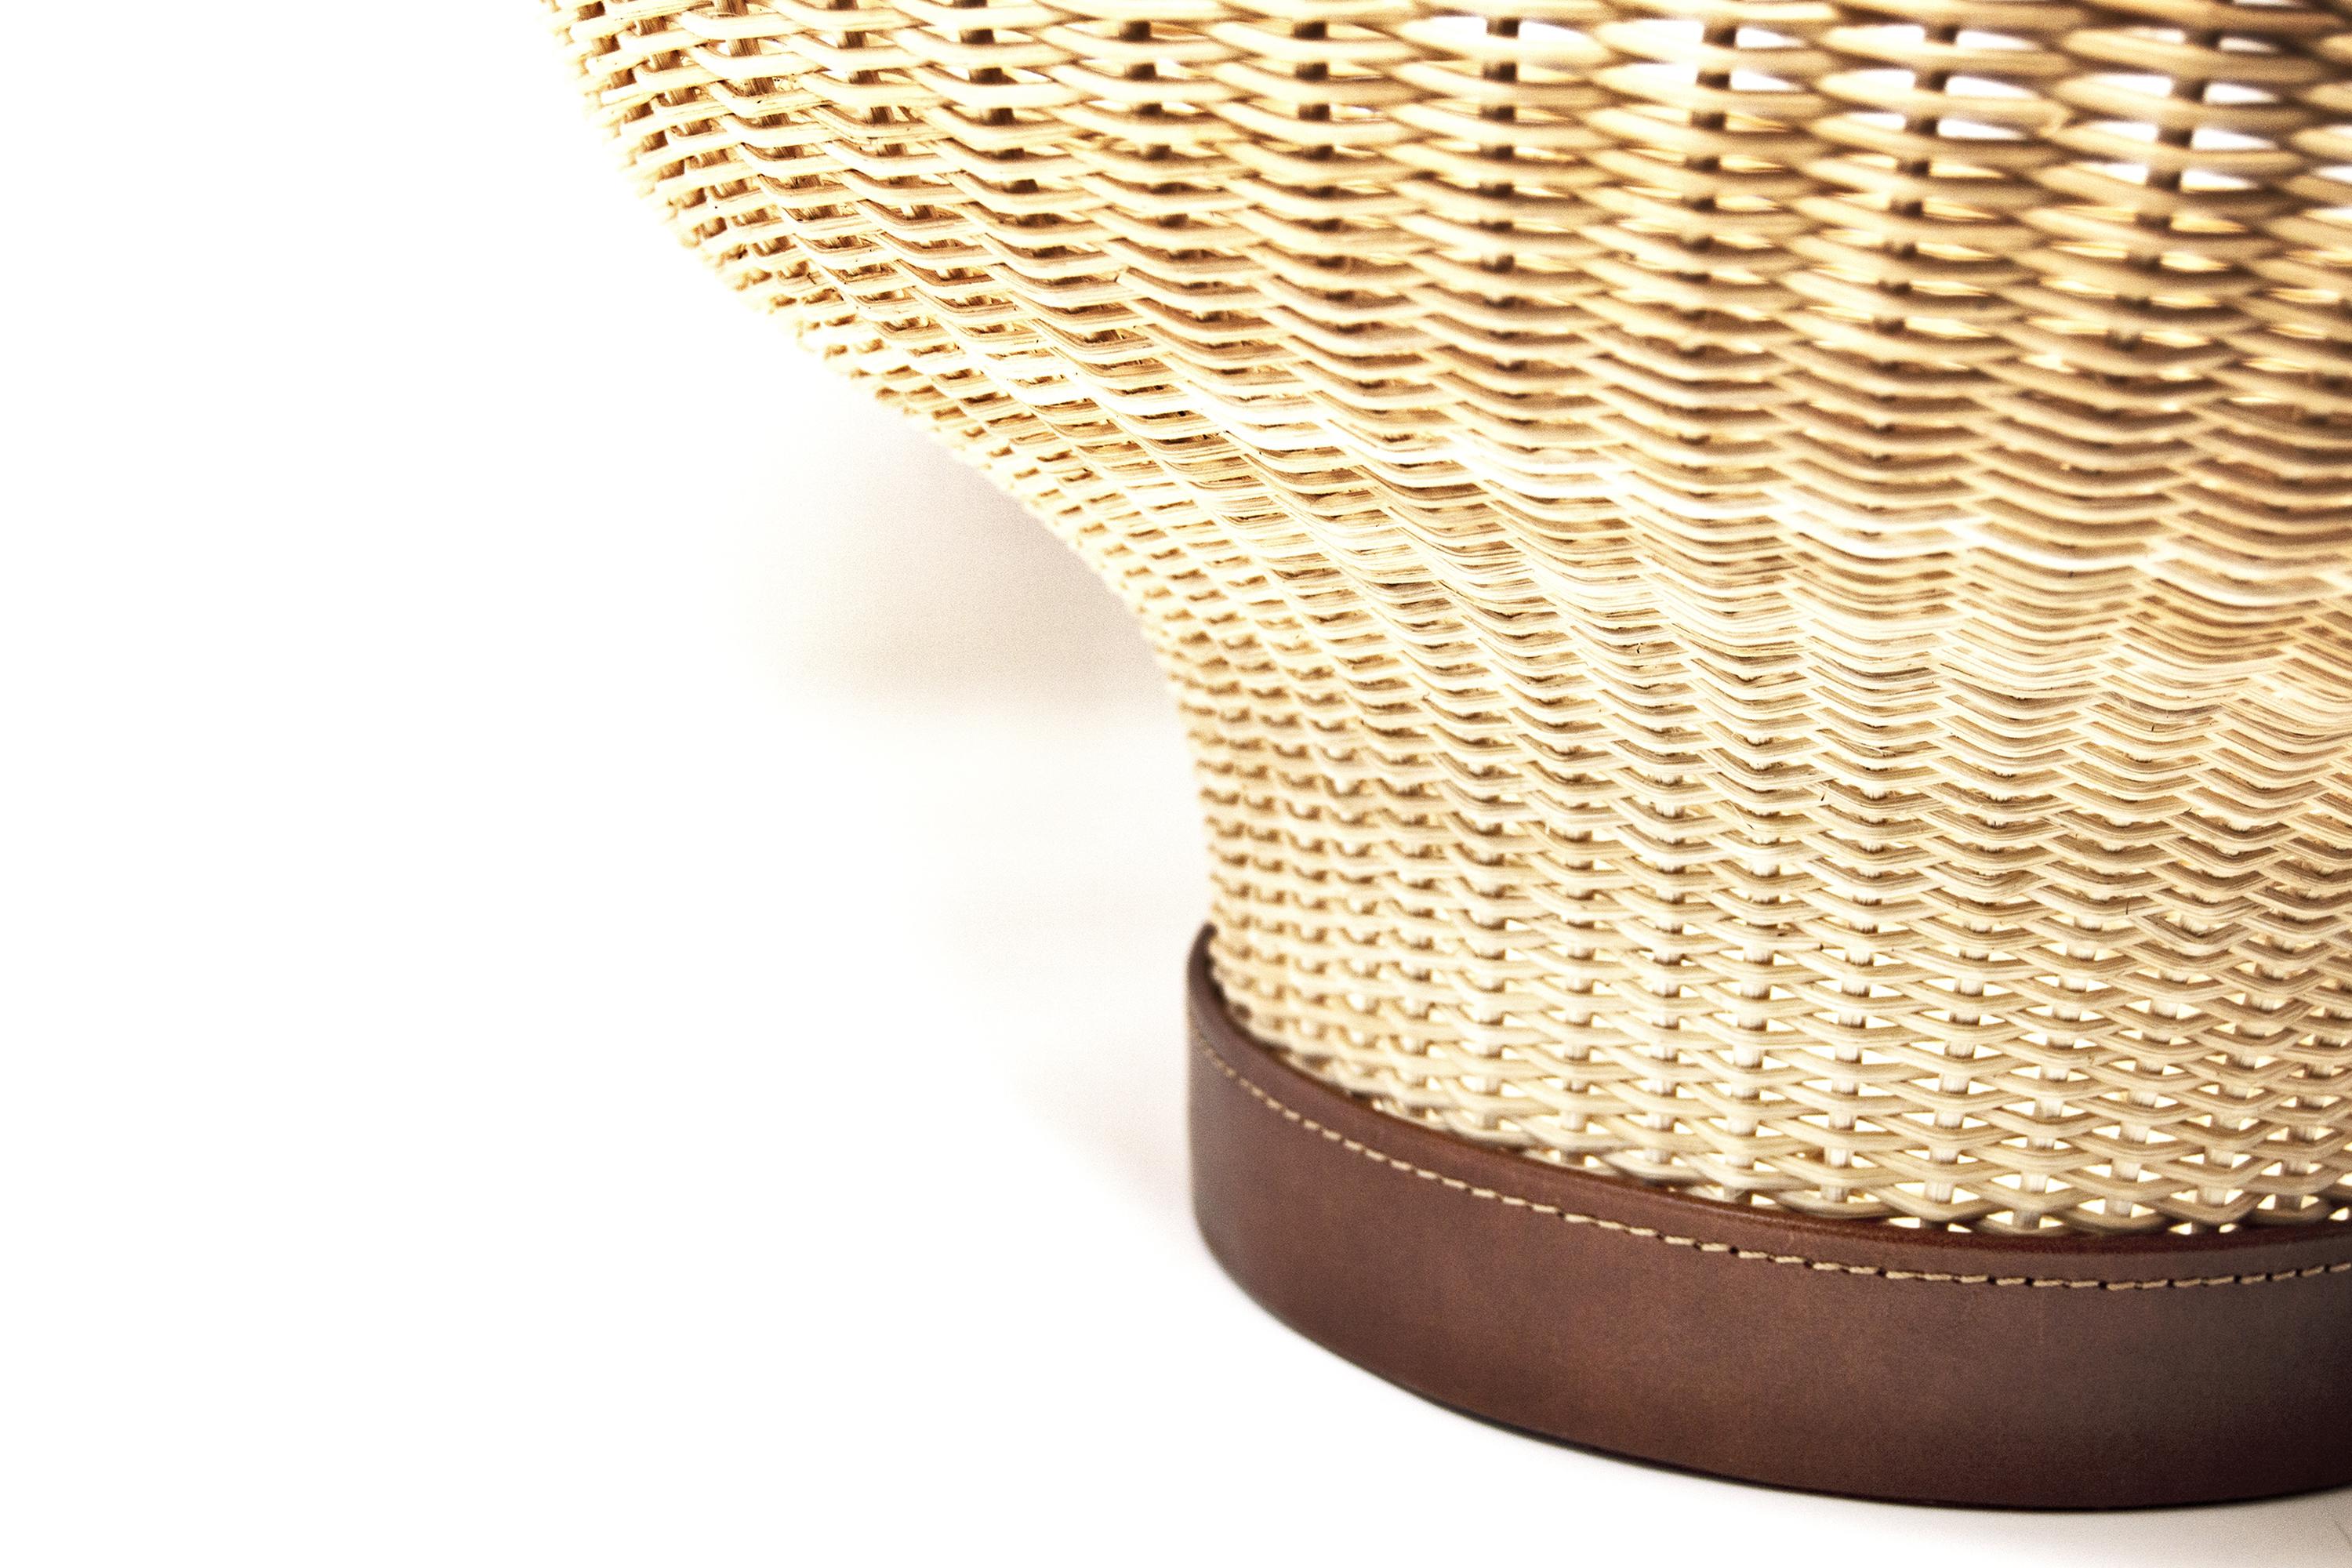 Italian Tasteful Handwoven Wicker and Leather Centerpiece 'Mawa' Made in Italy